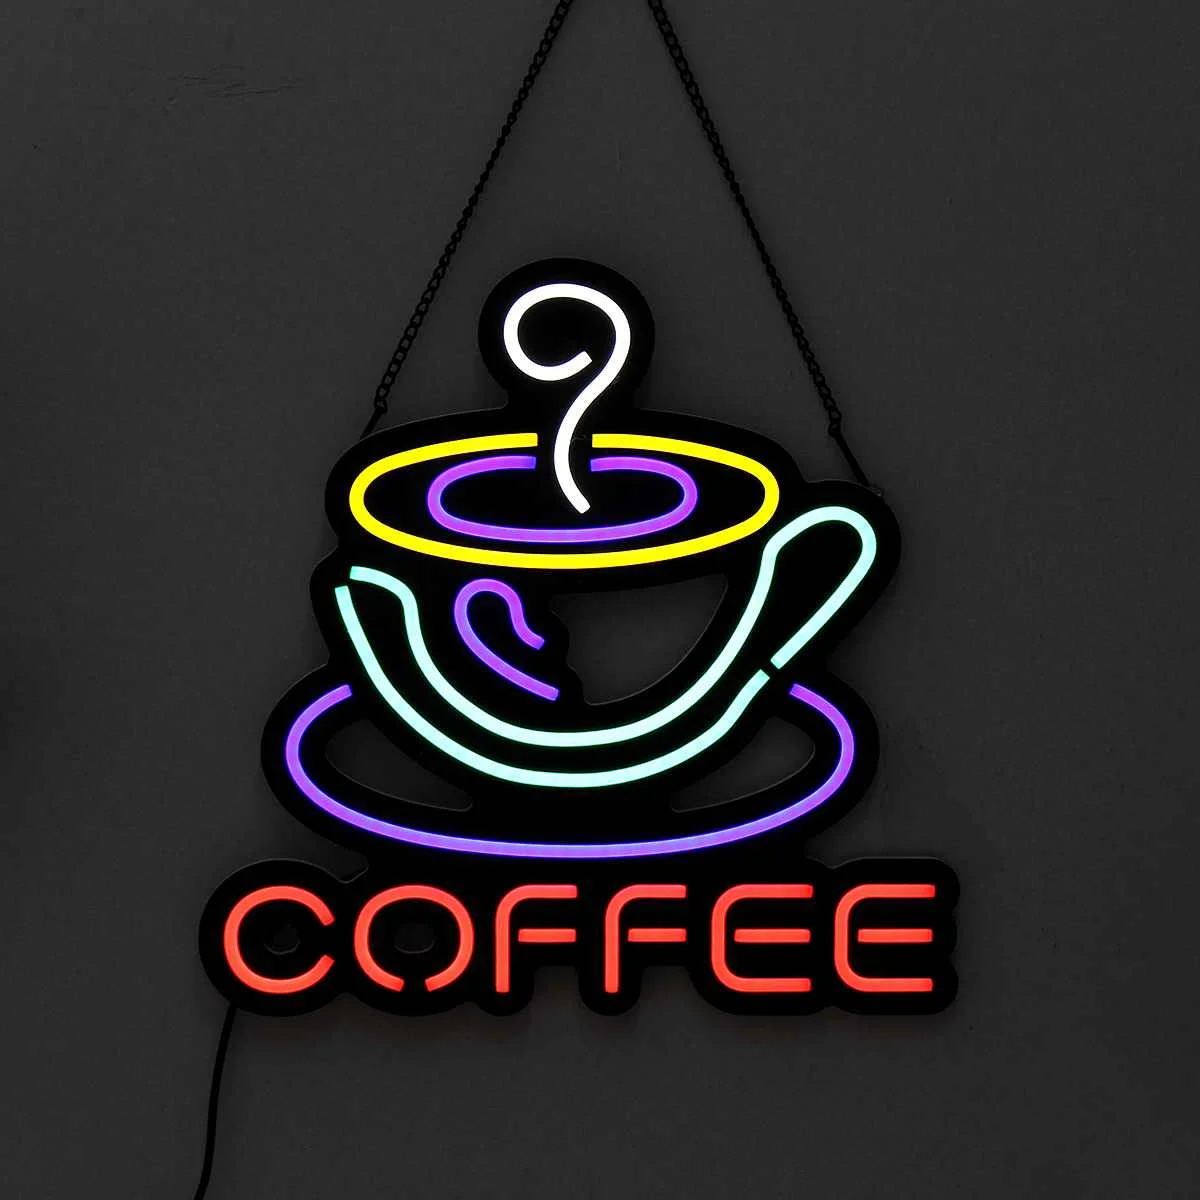 COFFEE LED Neon Sign Light Hanging Party Bar Club Visual Artwork Lamp Wall Decoration Commercial Lighting Neon Bulbs AC110-240V